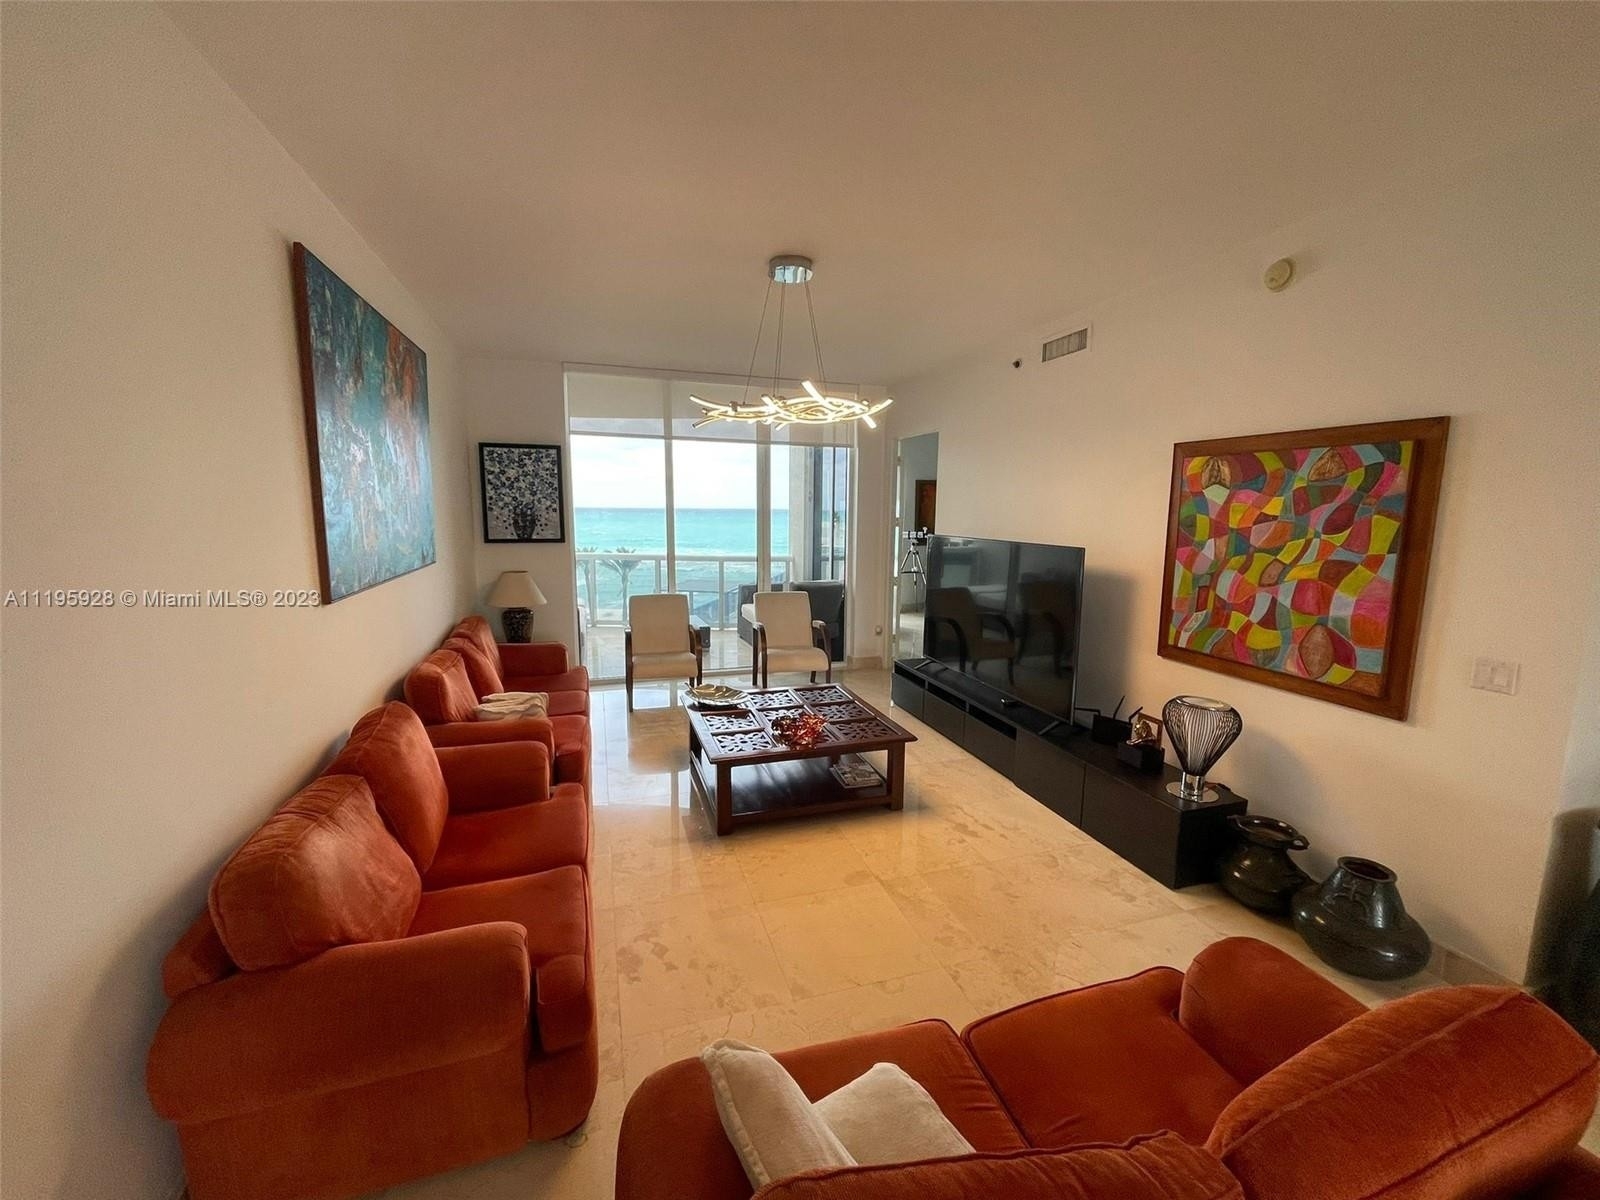 6. Condominiums for Sale at 15901 Collins Ave, 504 Sunny Isles Beach, FL 33160